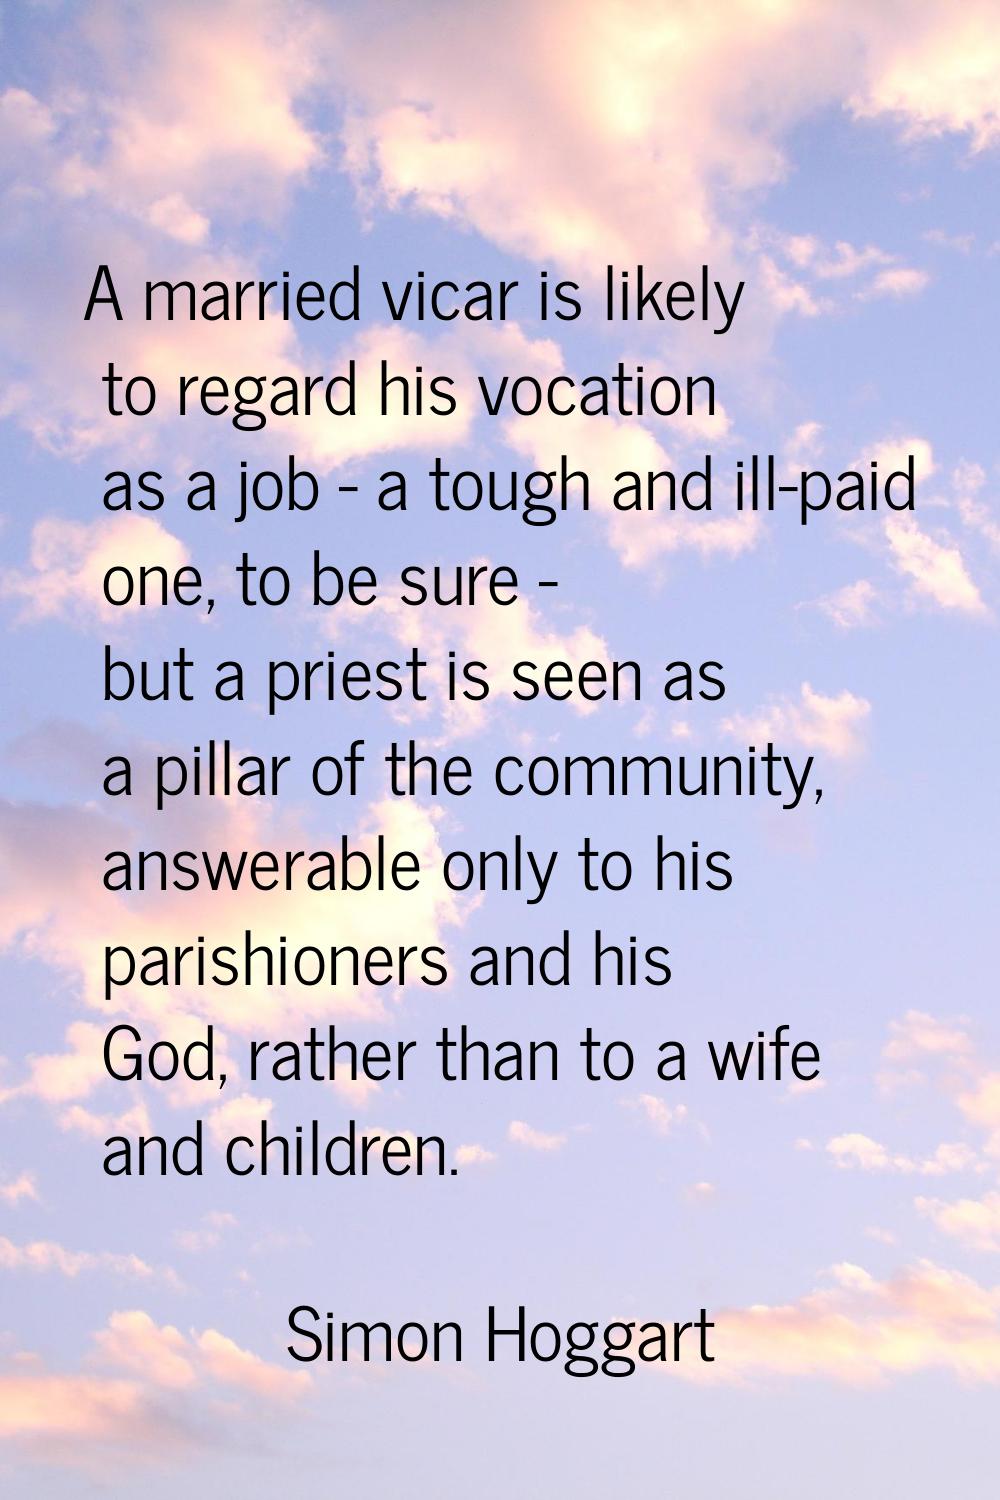 A married vicar is likely to regard his vocation as a job - a tough and ill-paid one, to be sure - 